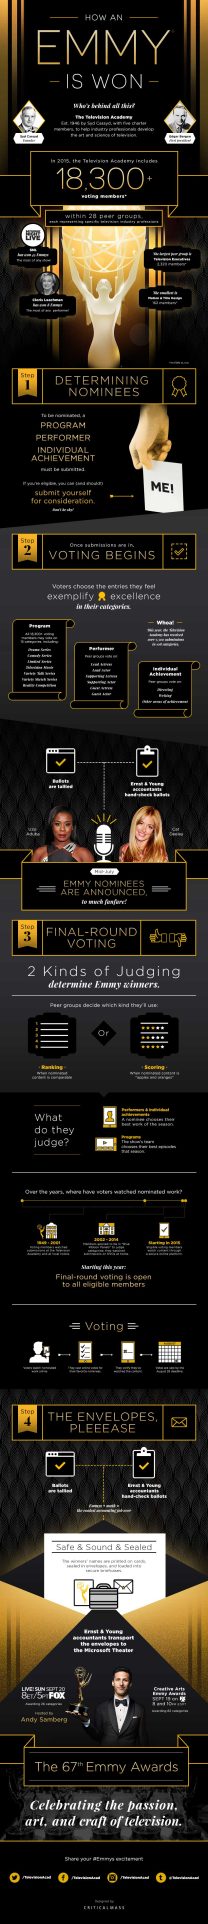 How an Emmy is Won? [Infographic]